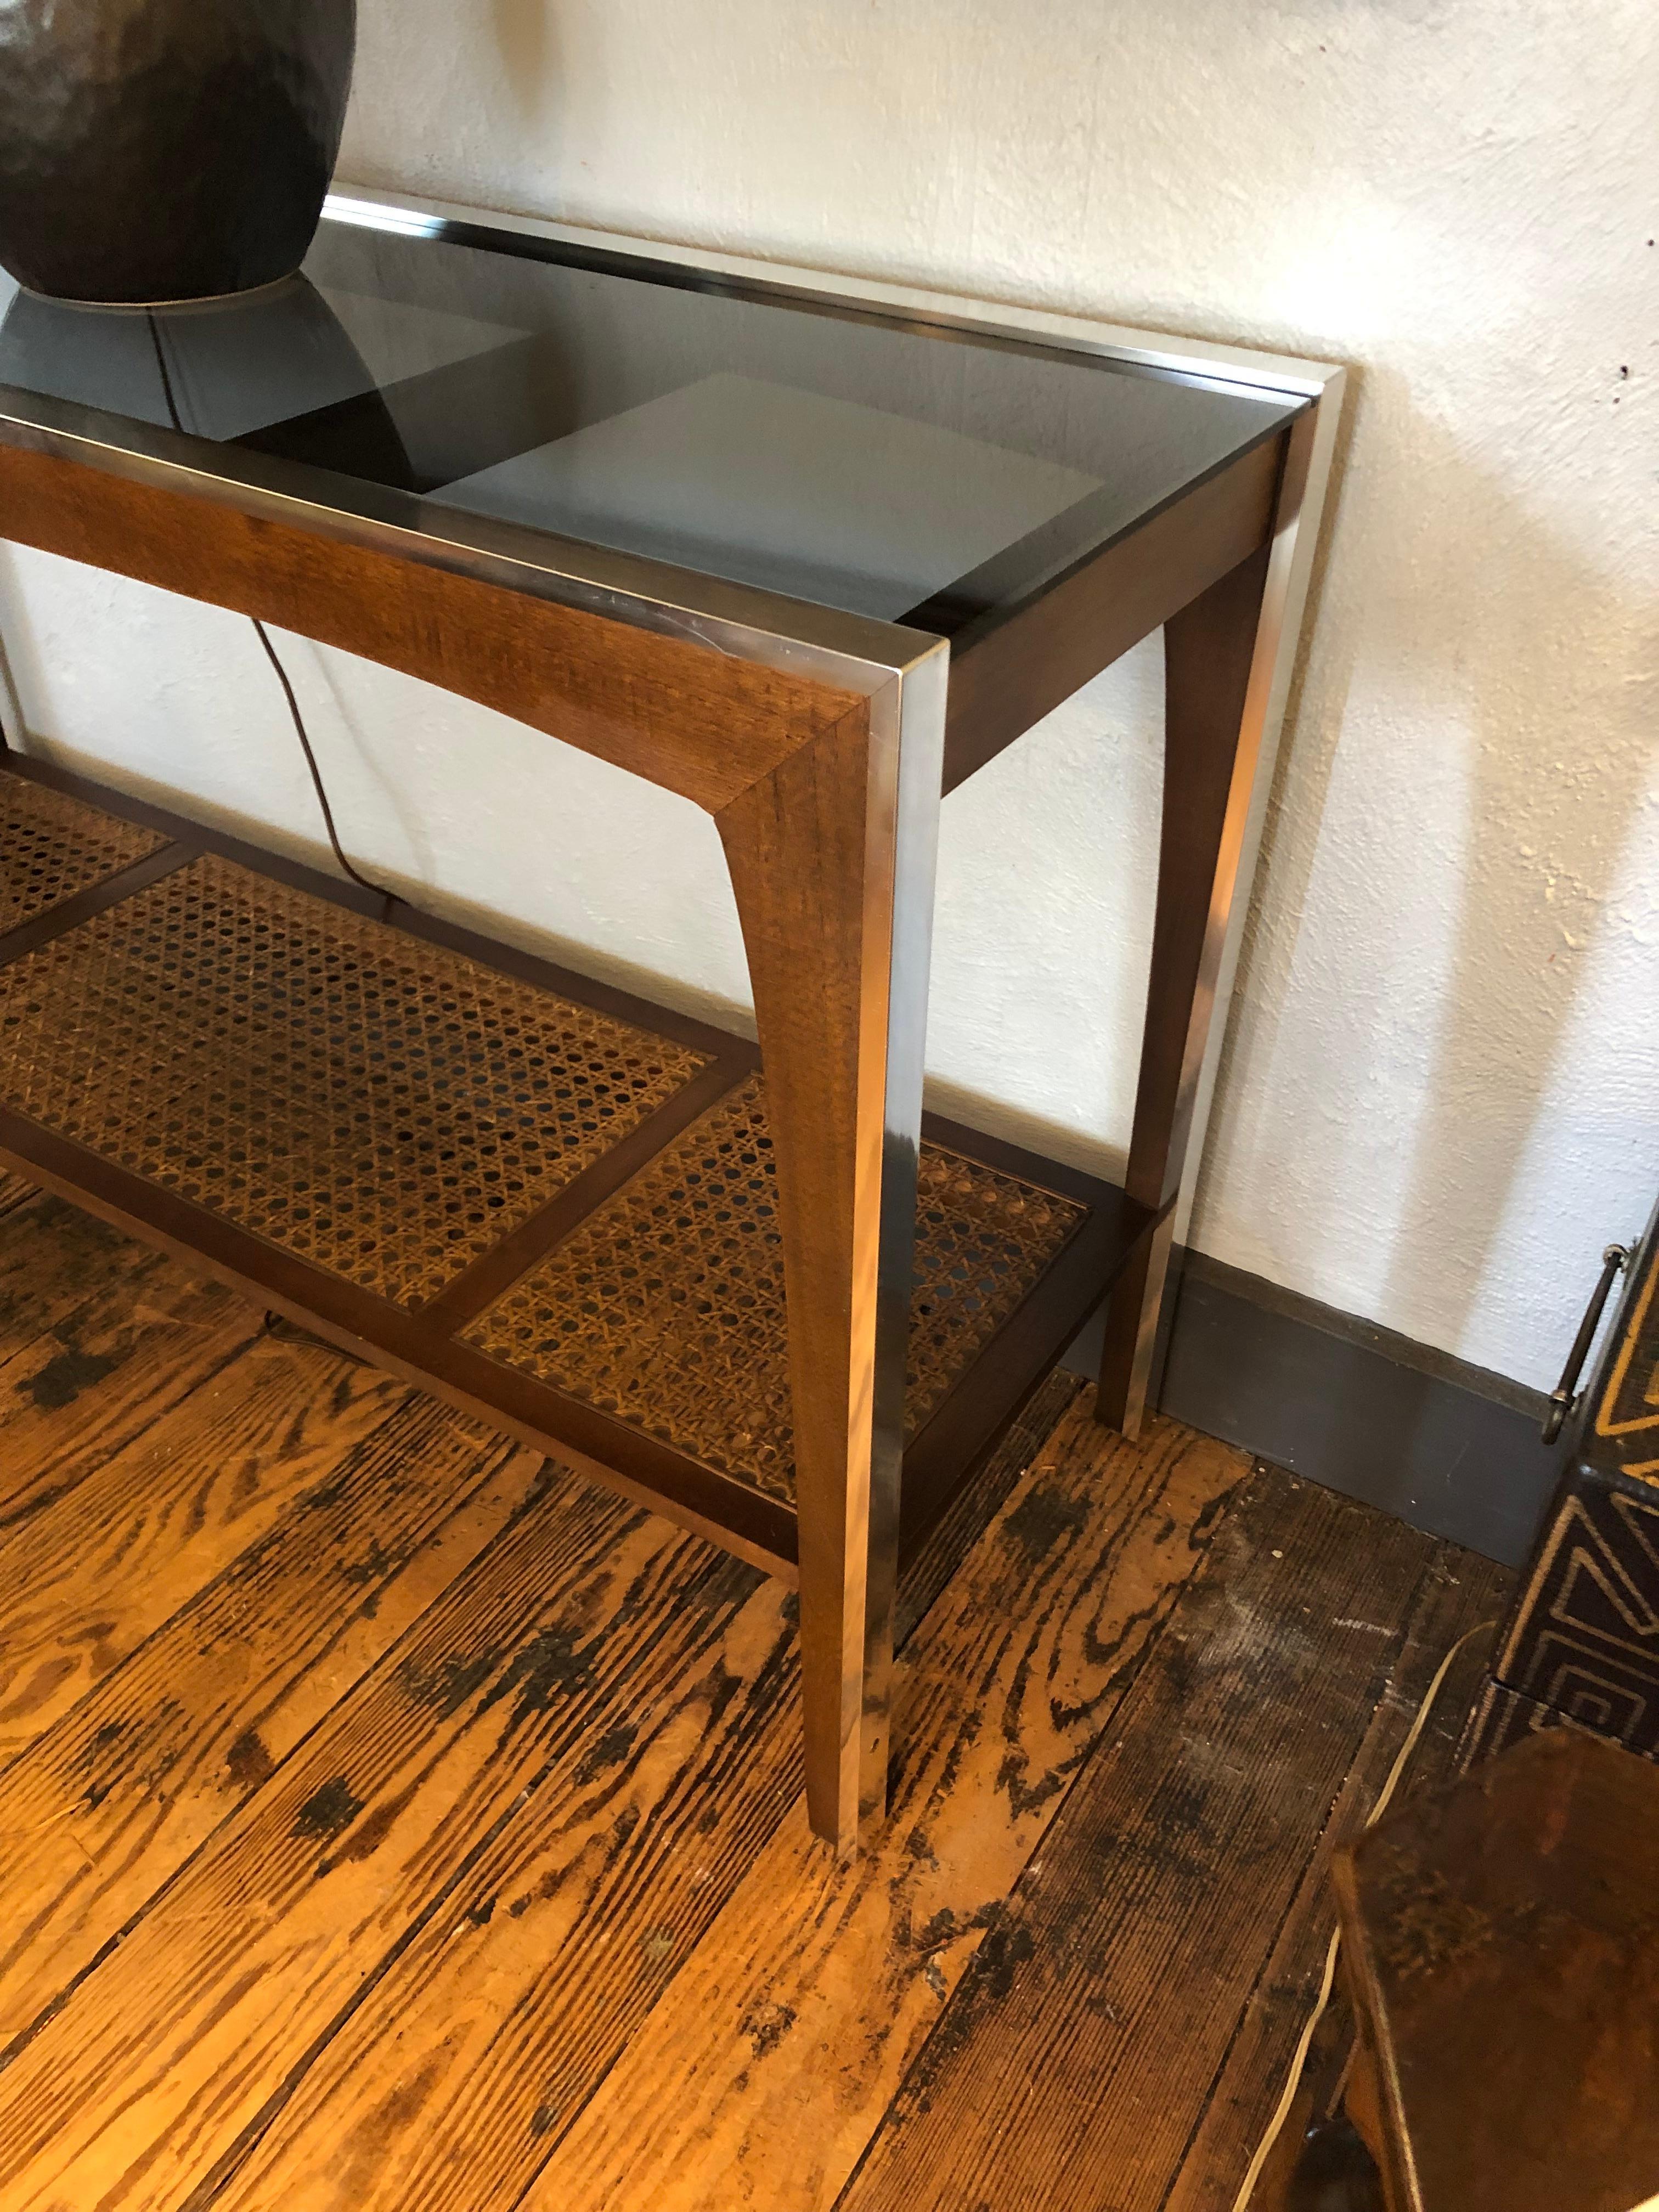 Sleek Sophisticated Wood Chrome and Glass Console Table In Good Condition For Sale In Hopewell, NJ